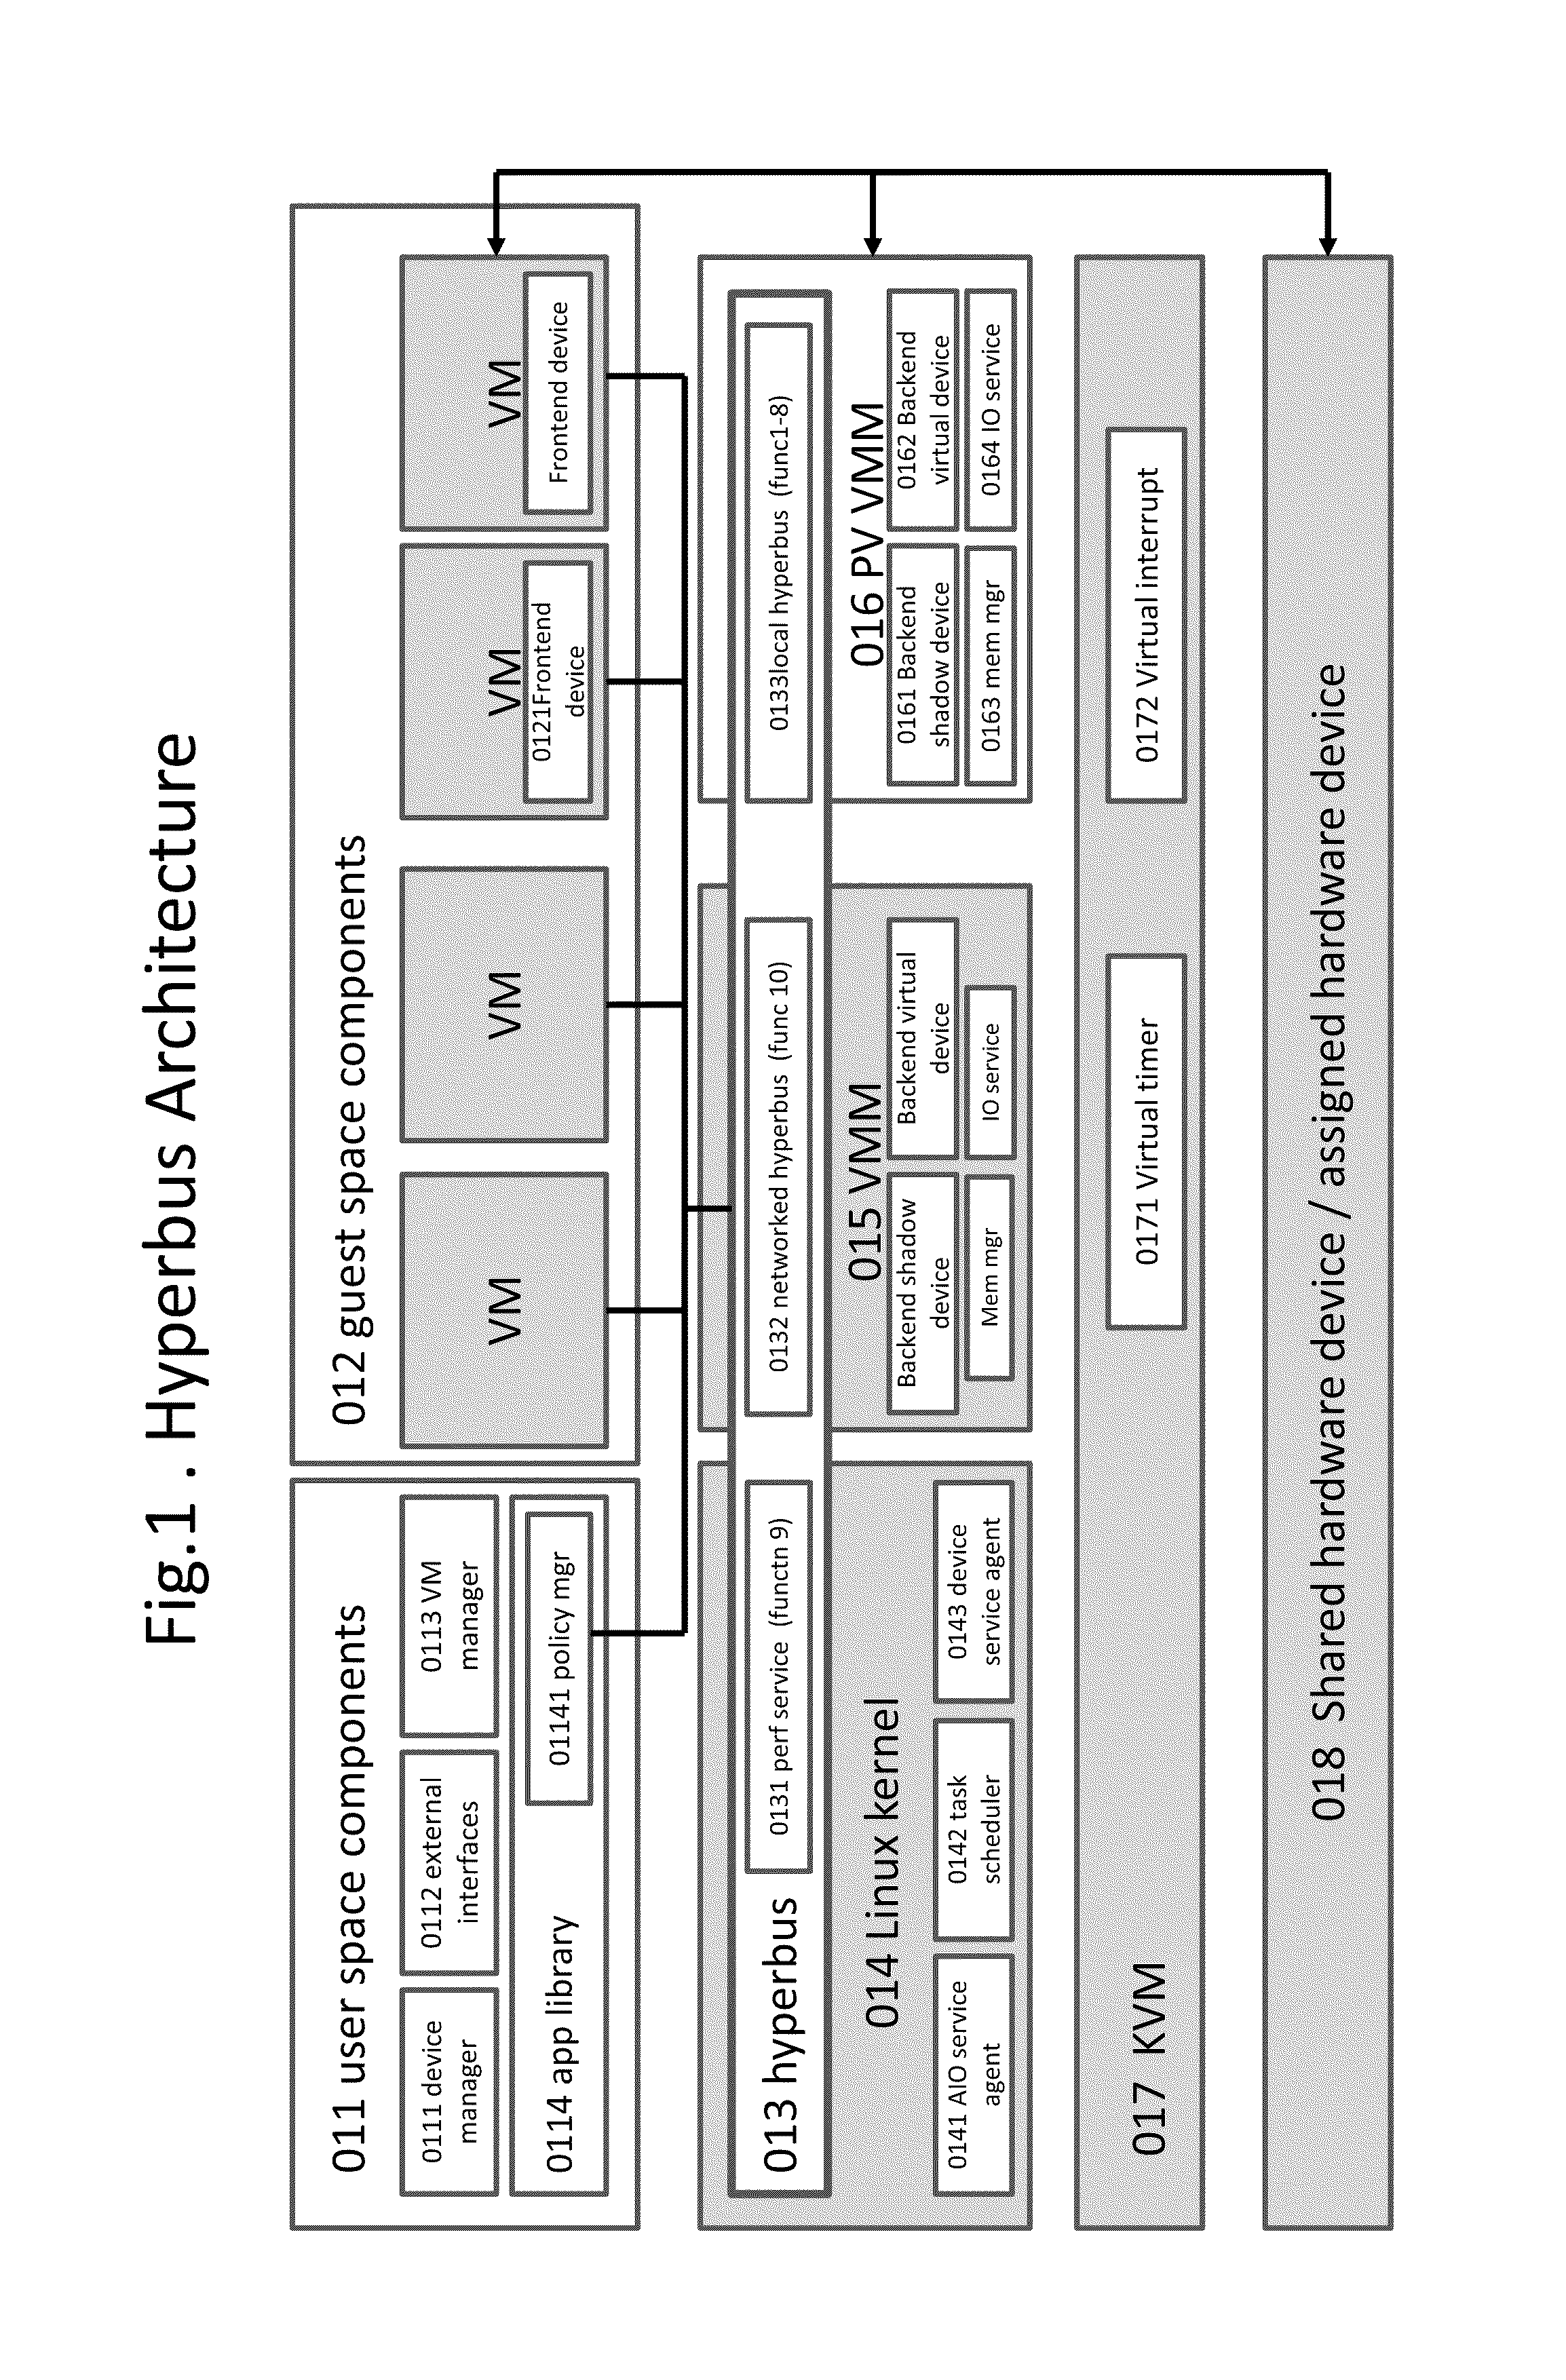 Kernel bus system with a hyberbus and method therefor